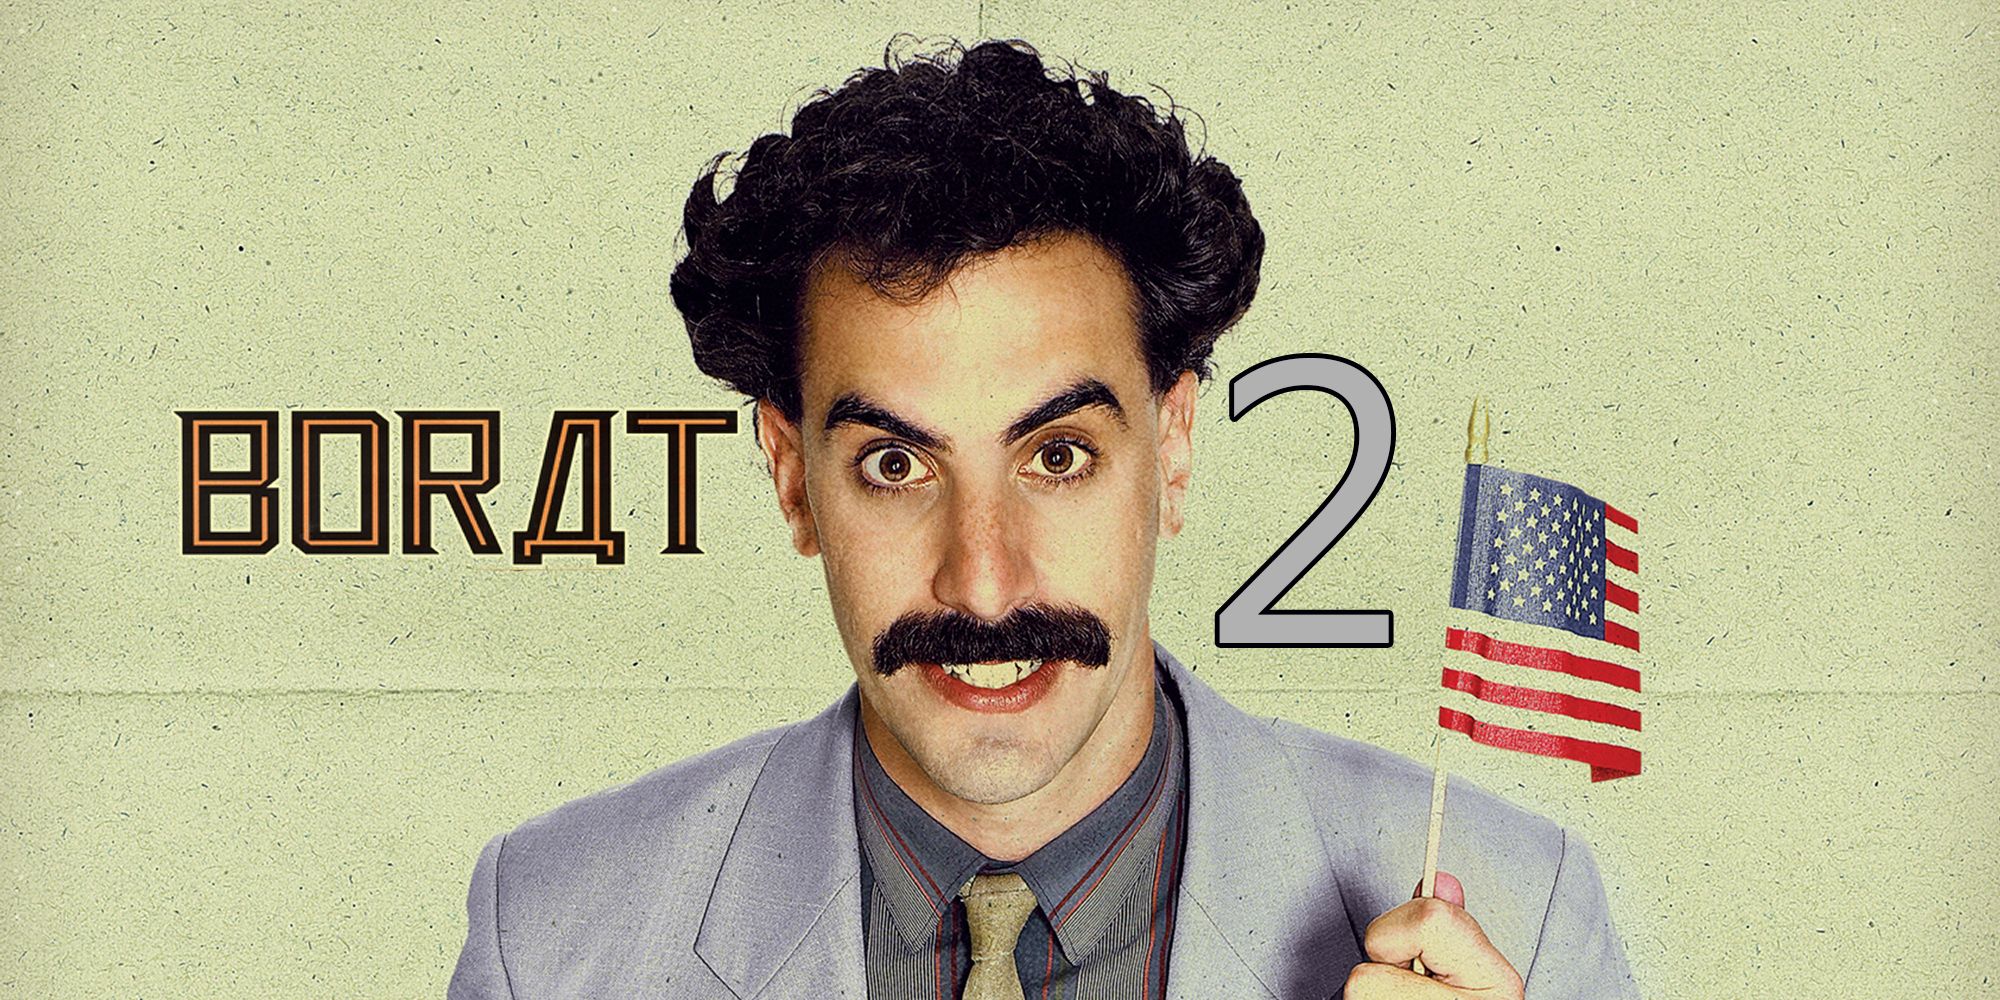 Borat 2 Spoilers Were Reported In February (But Nobody Realized)